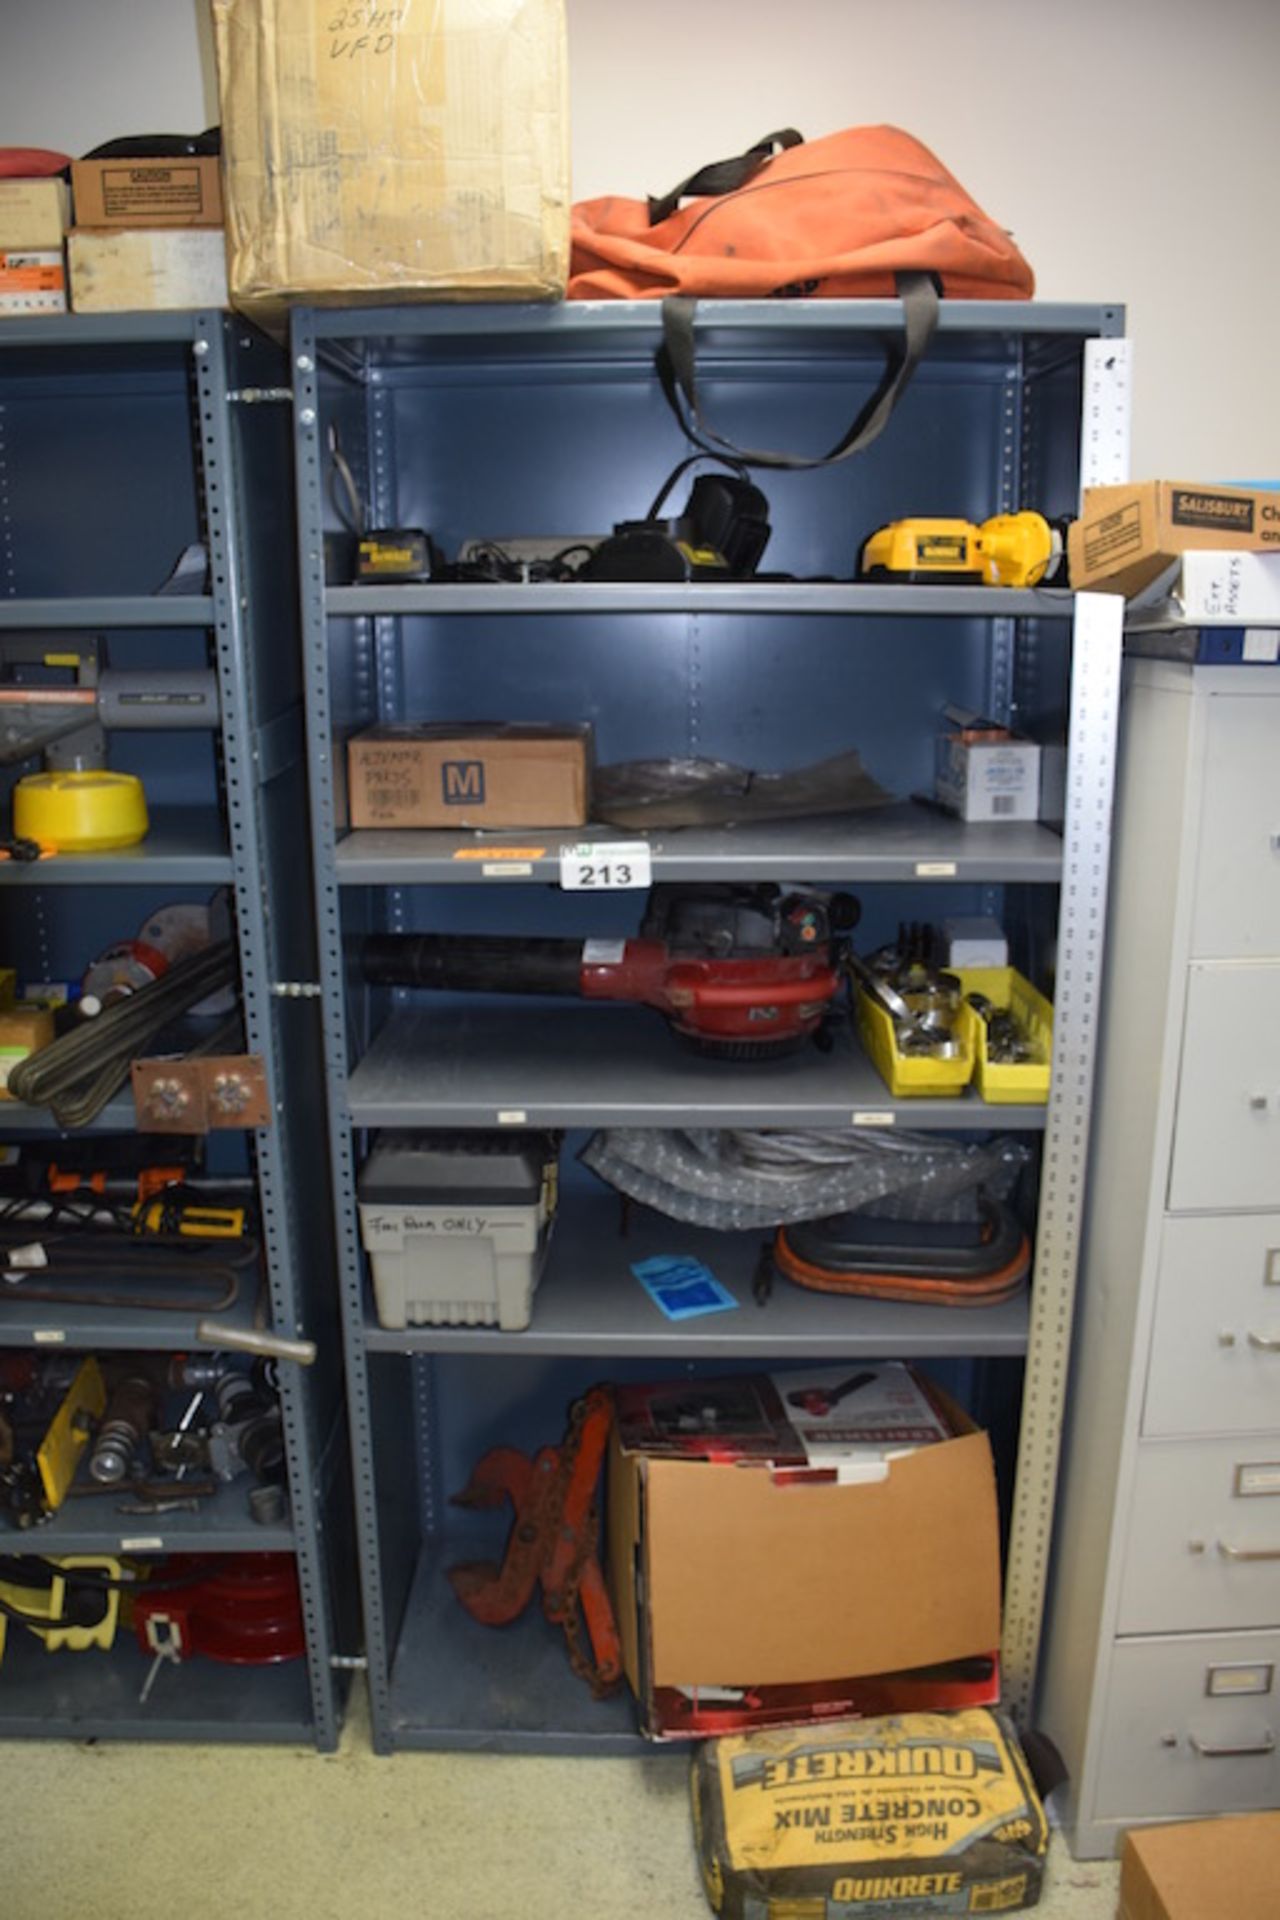 Shelving Unit & Contents - Updated Photo